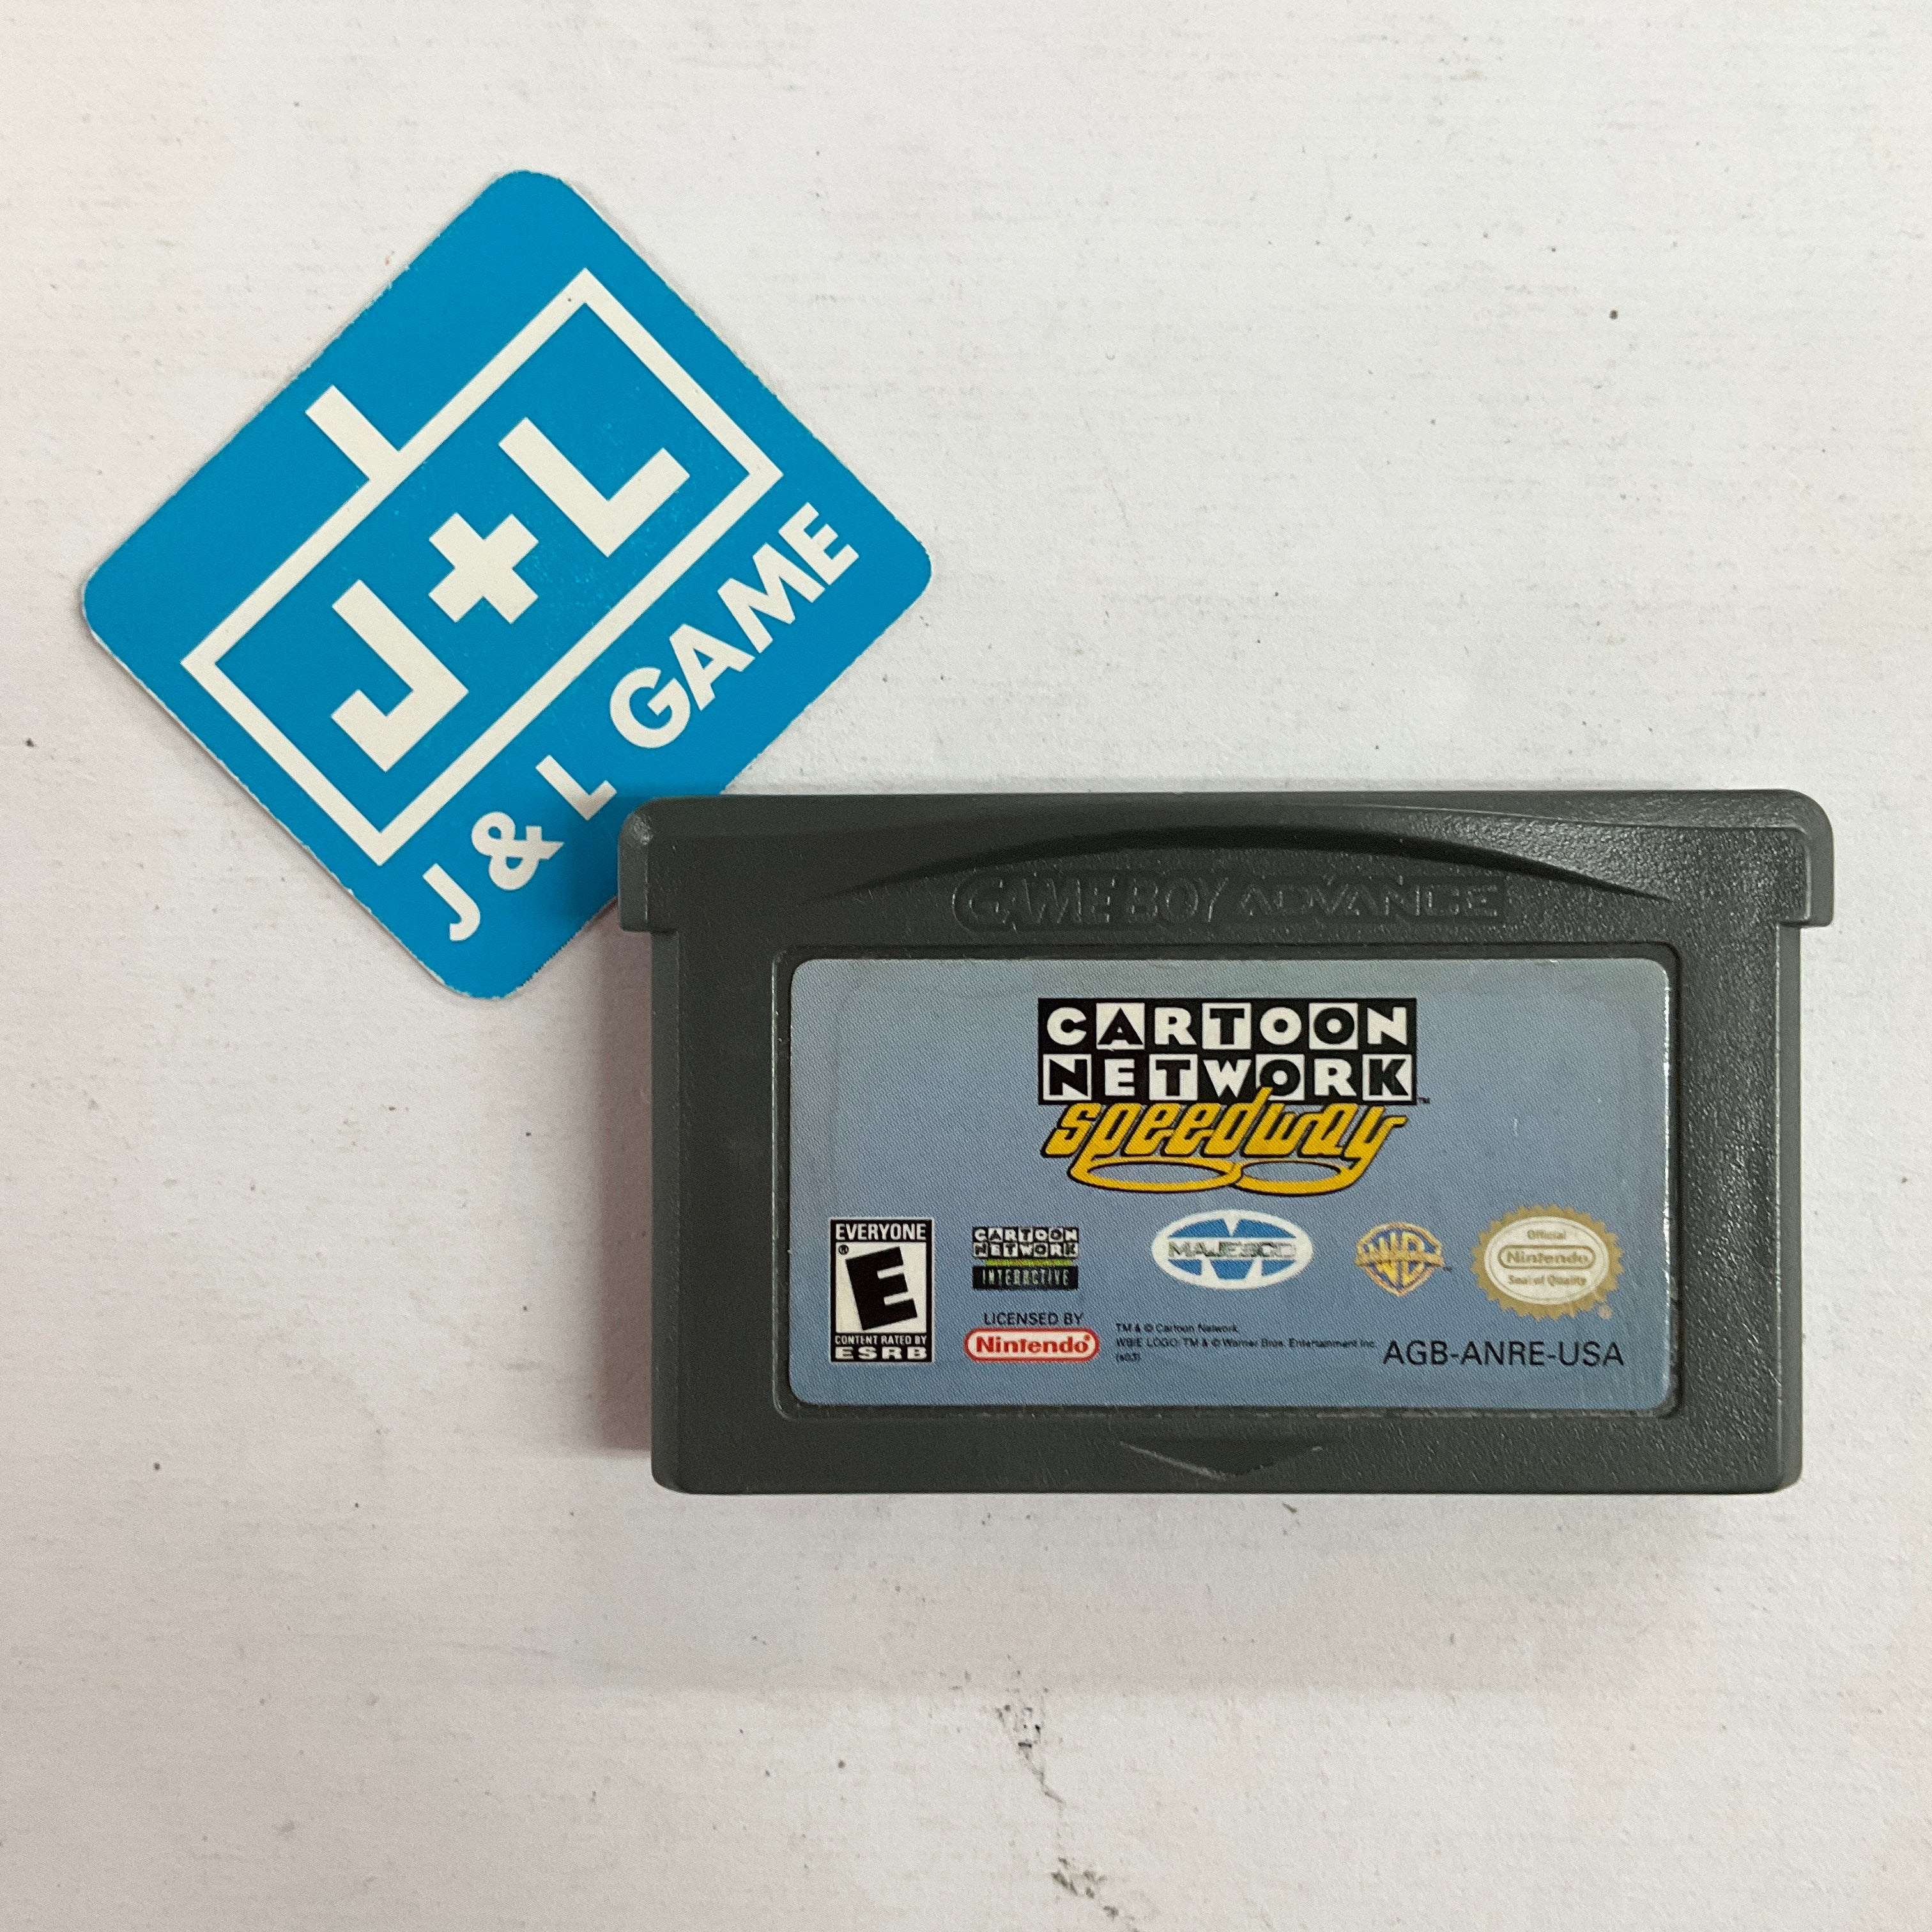 Cartoon Network Speedway - (GBA) Game Boy Advance [Pre-Owned] Video Games Majesco   